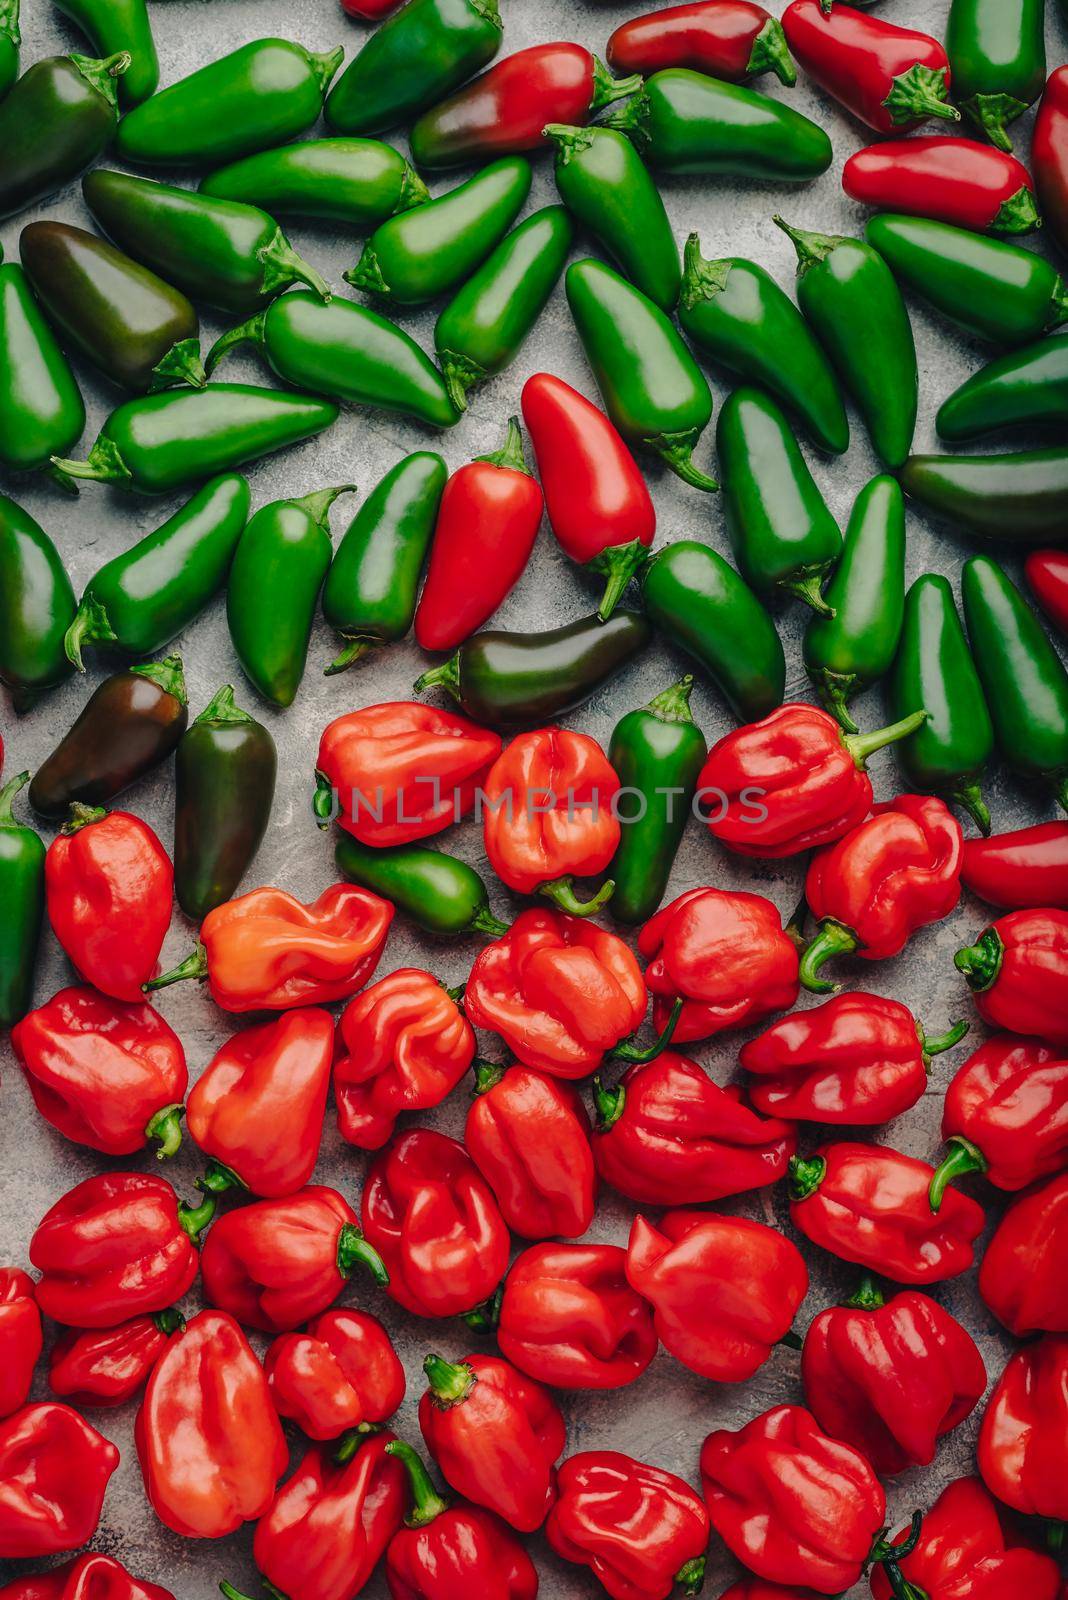 Sorted Hot Jalapeno and Habanero Peppers on Concrete Background. View from Above